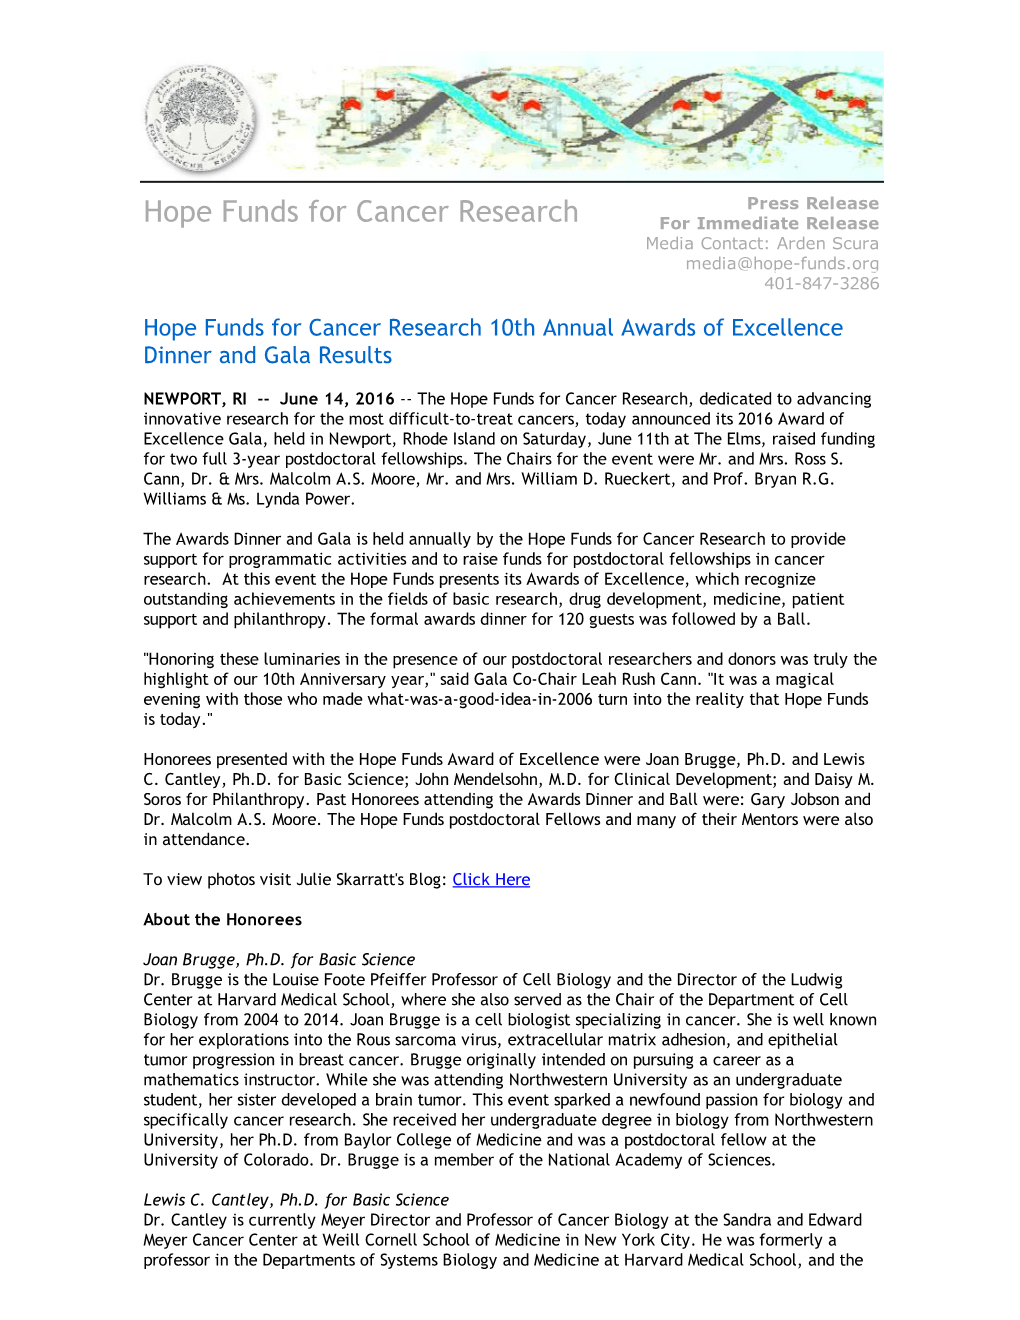 Press Release Hope Funds for Cancer Research for Immediate Release Media Contact: Arden Scura Media@Hope­Funds.Org 401­847­3286